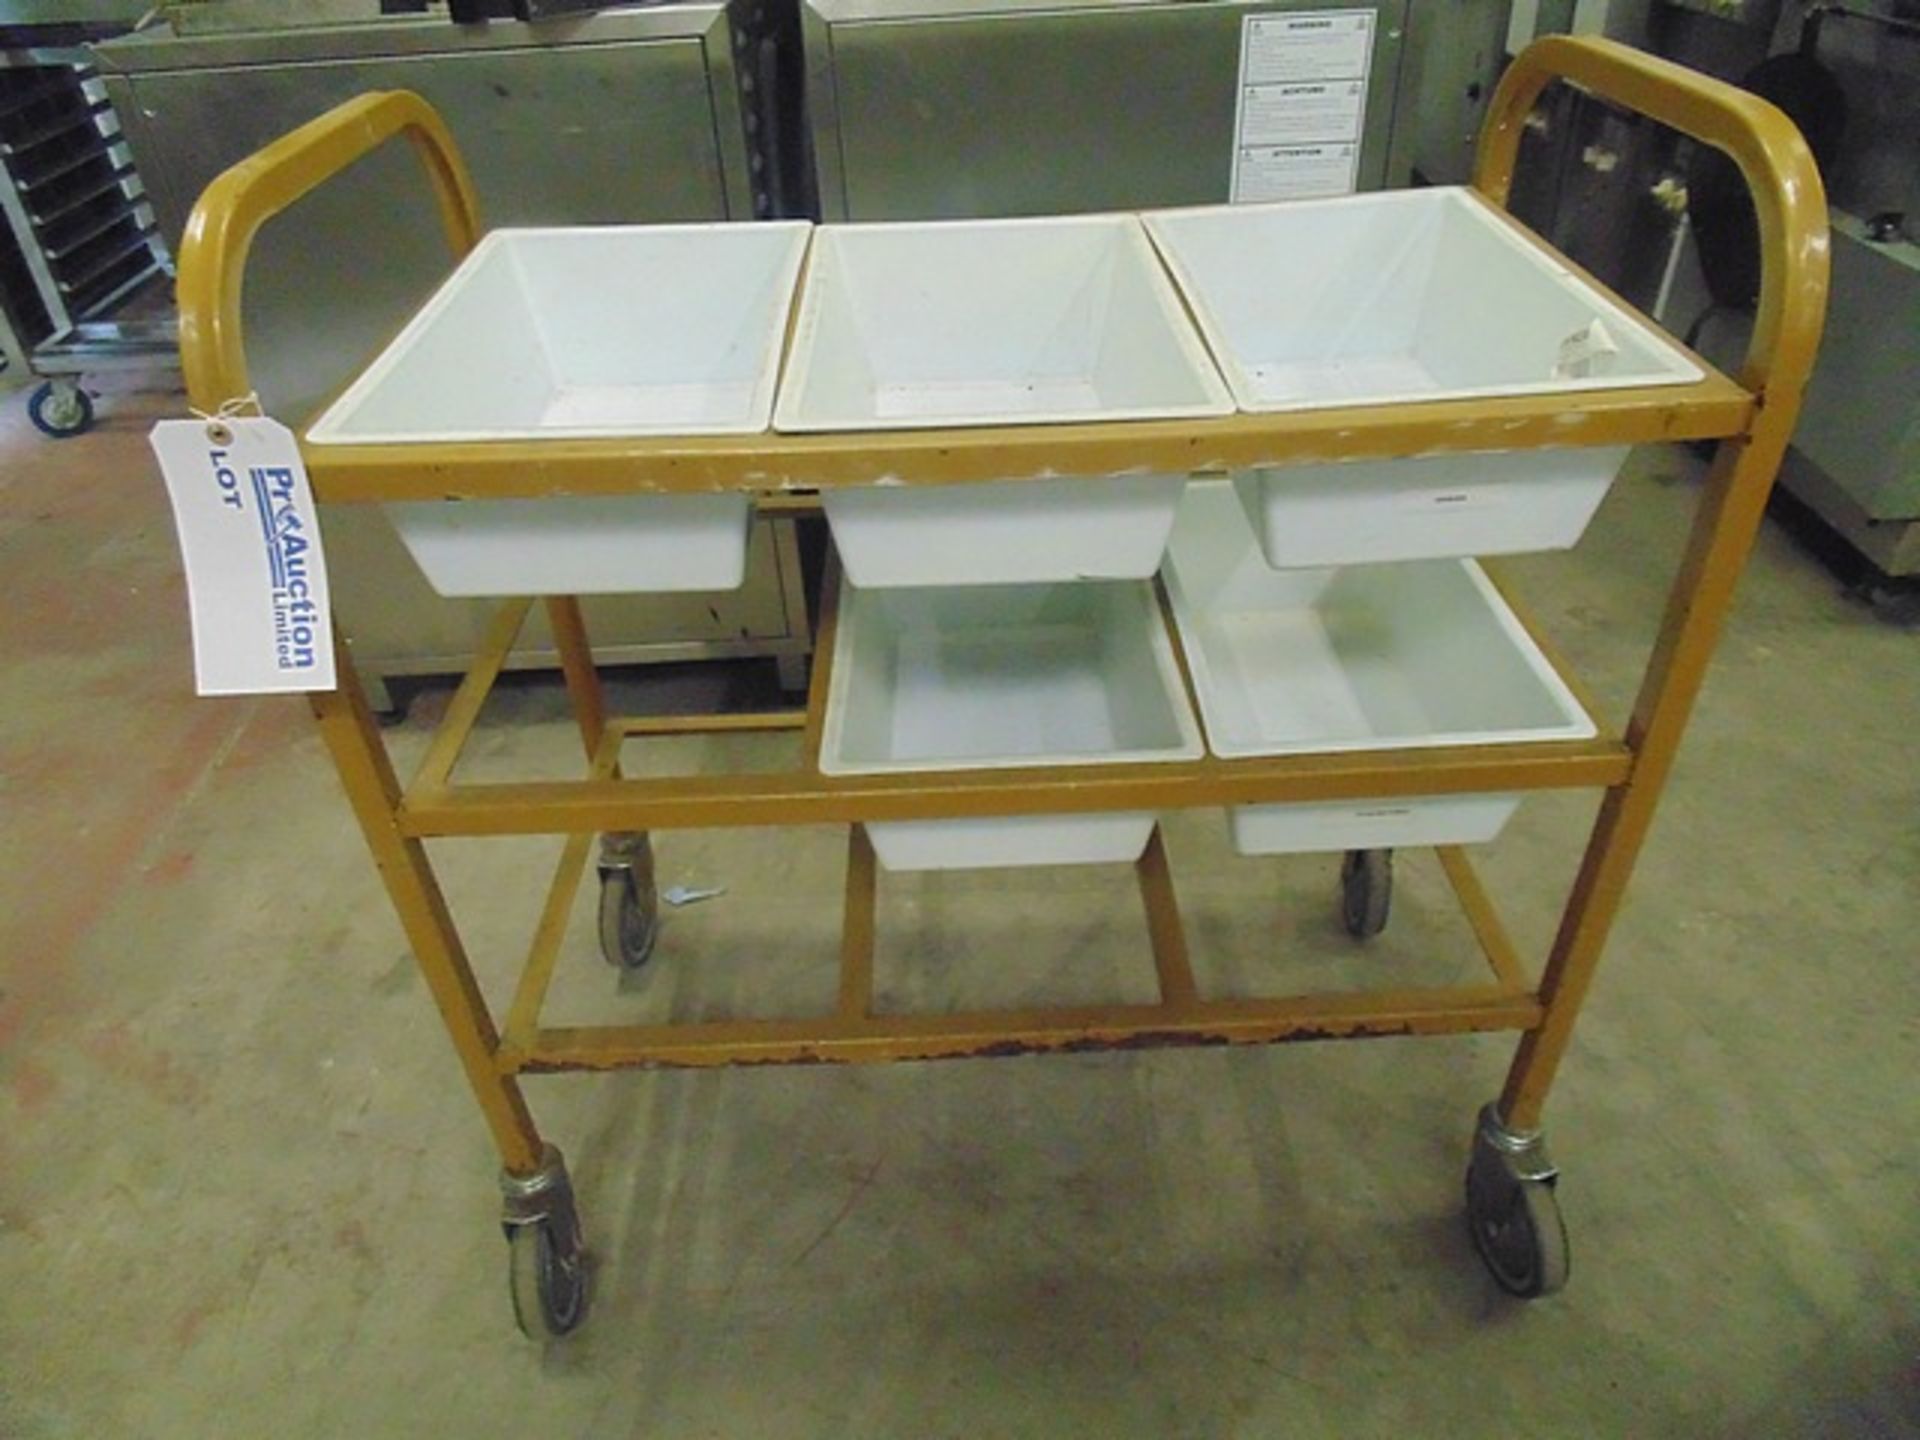 Mobile heavy duty three tier trolley the trolley has slotted compartments on each tier 900mm x 460mm